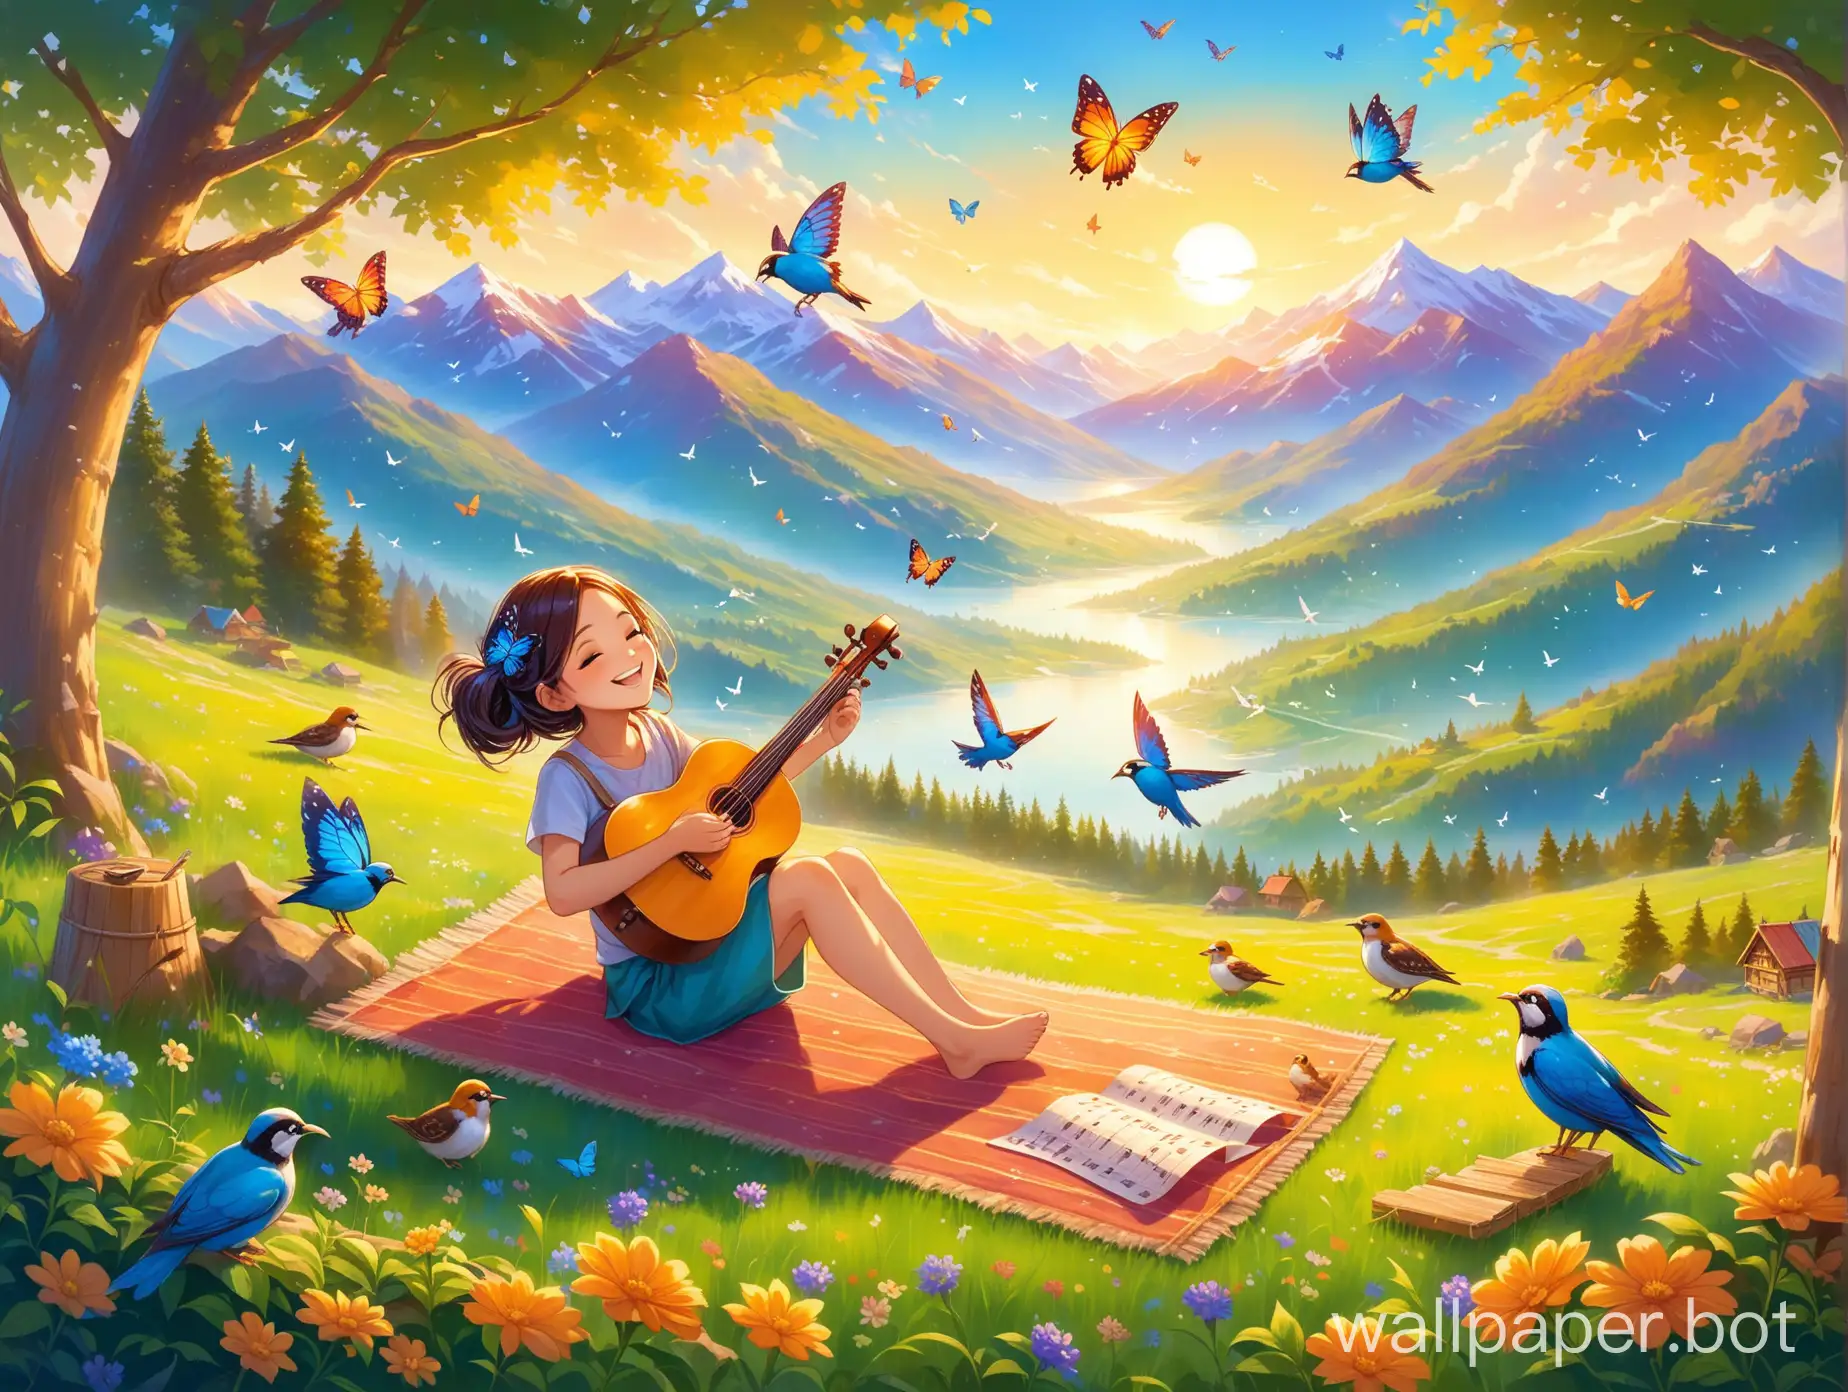 A boney enjoying in the nature relaxing by laying down humming a melody song with surroundings of birds , mountains , butterflies and a canvas with paints all smiles everywhere